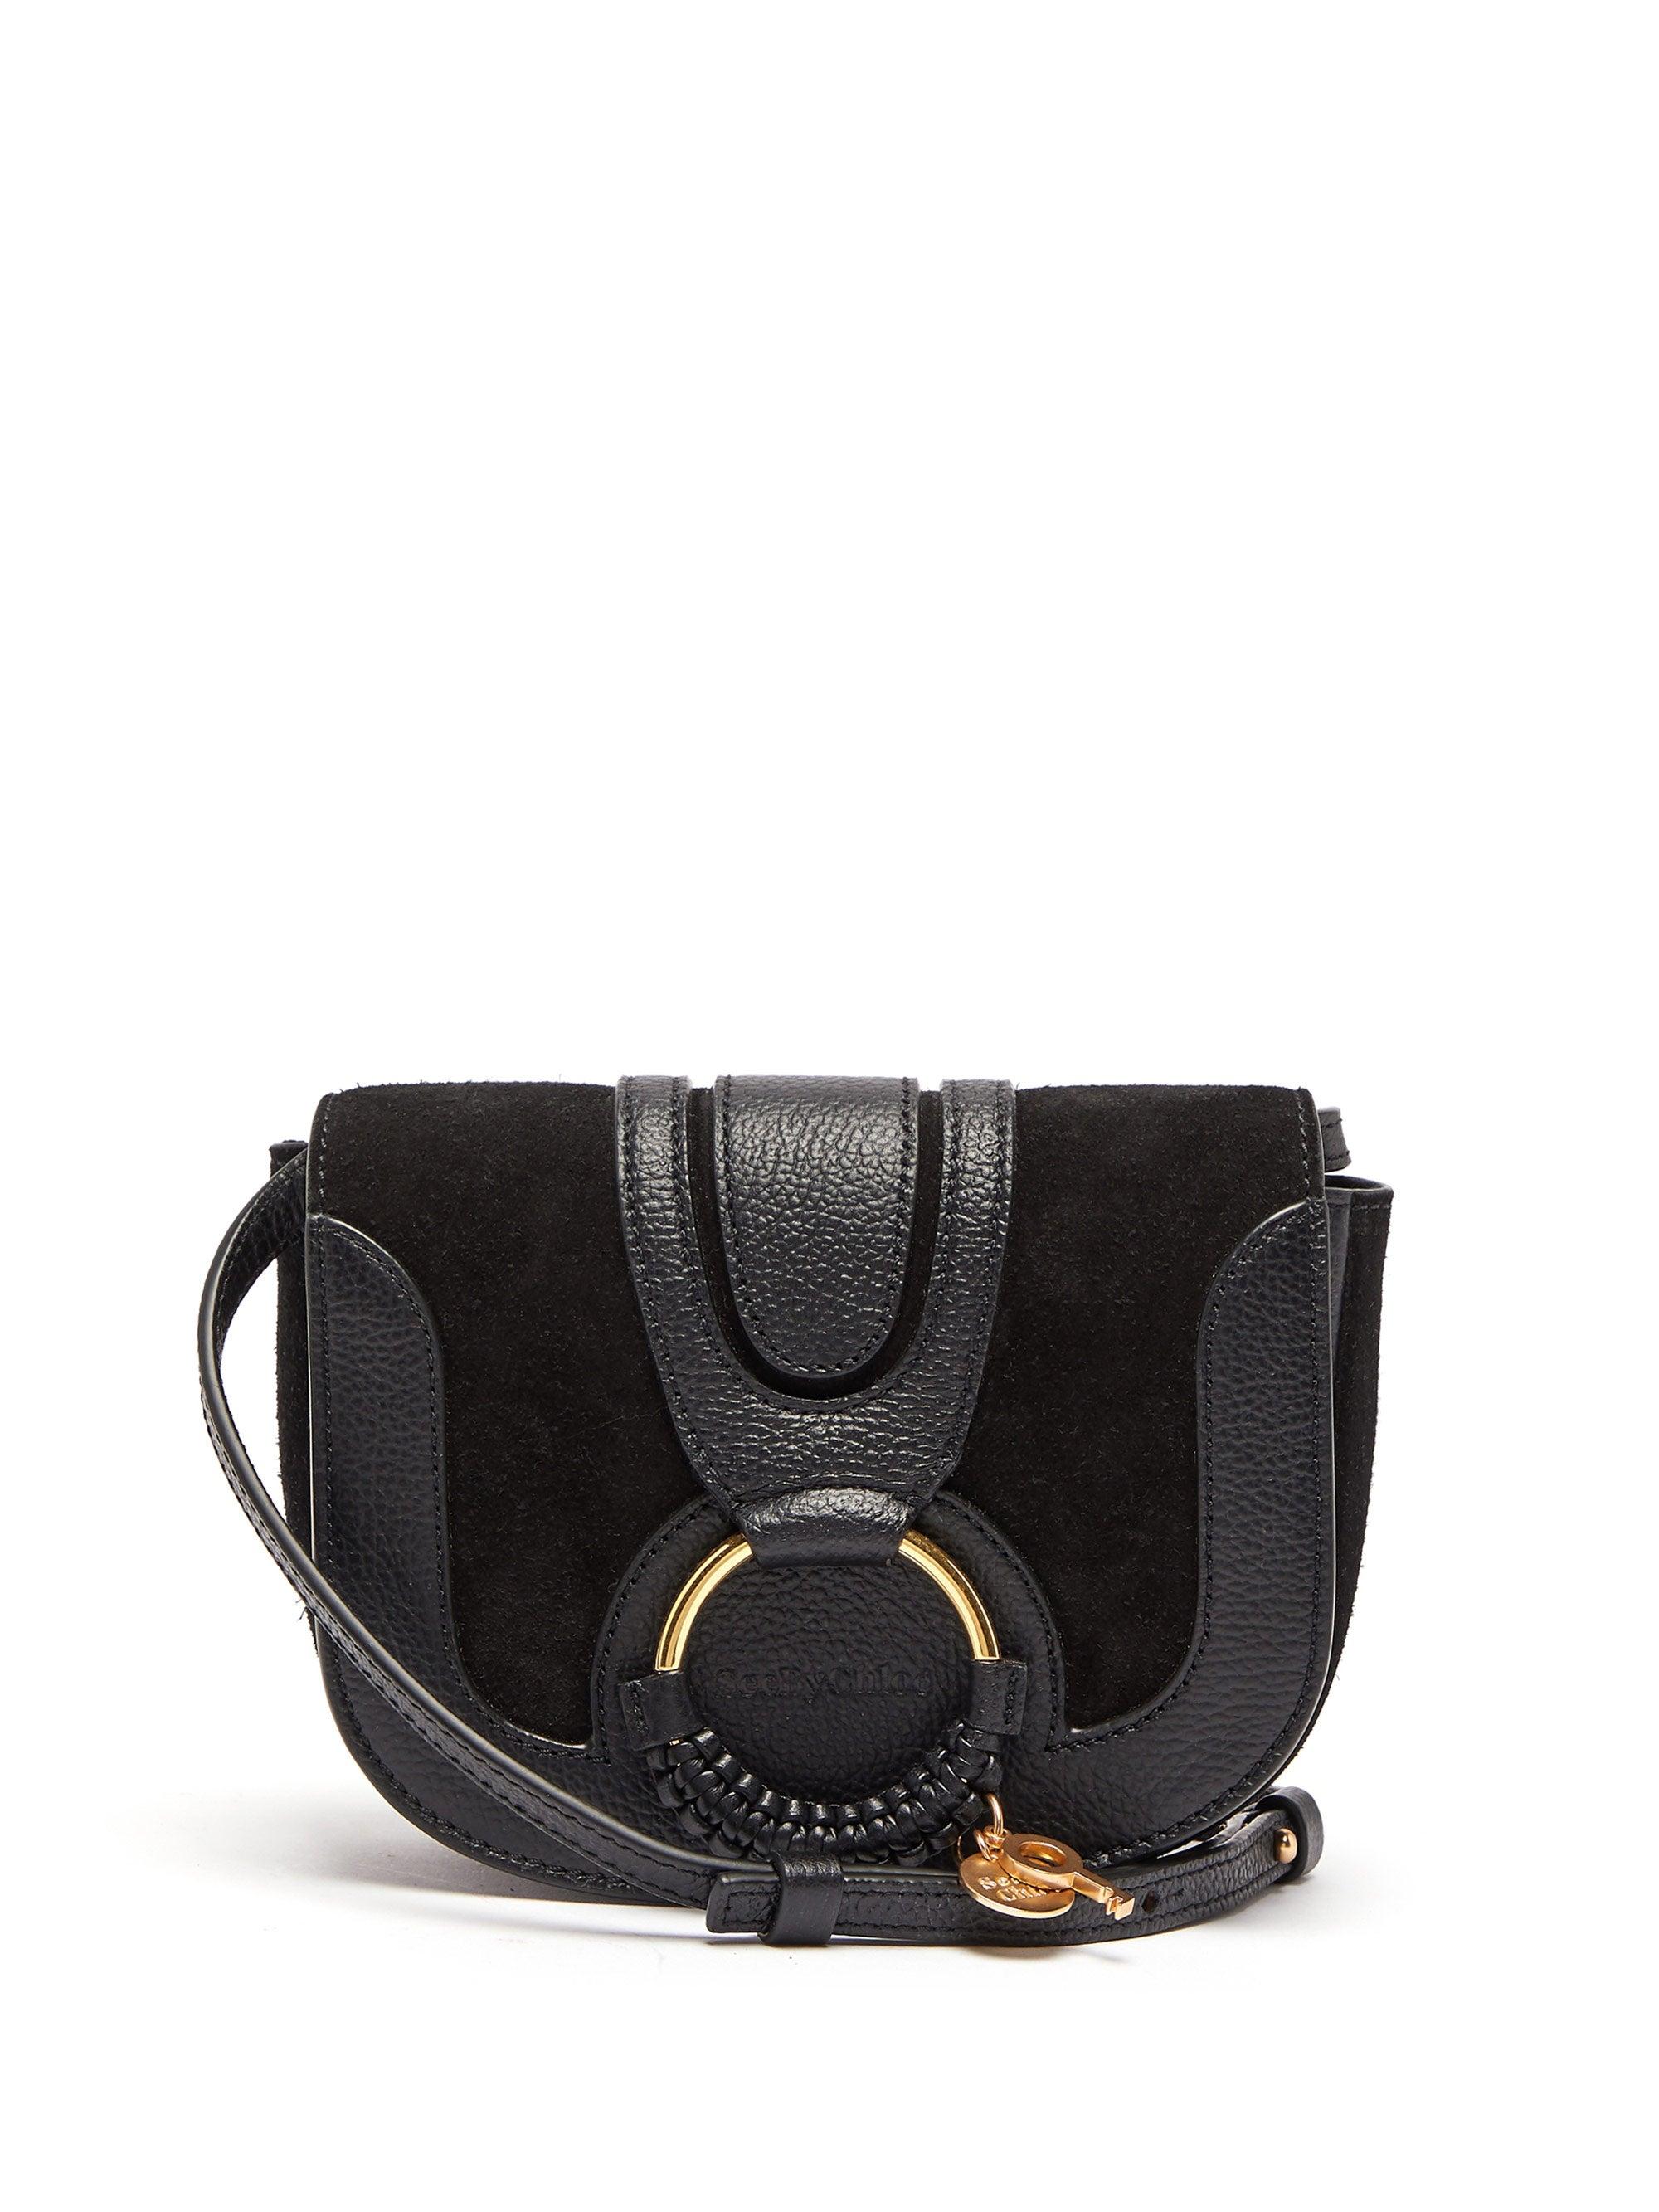 See By Chloé Hana Mini Leather And Suede Cross-body Bag in Black - Lyst